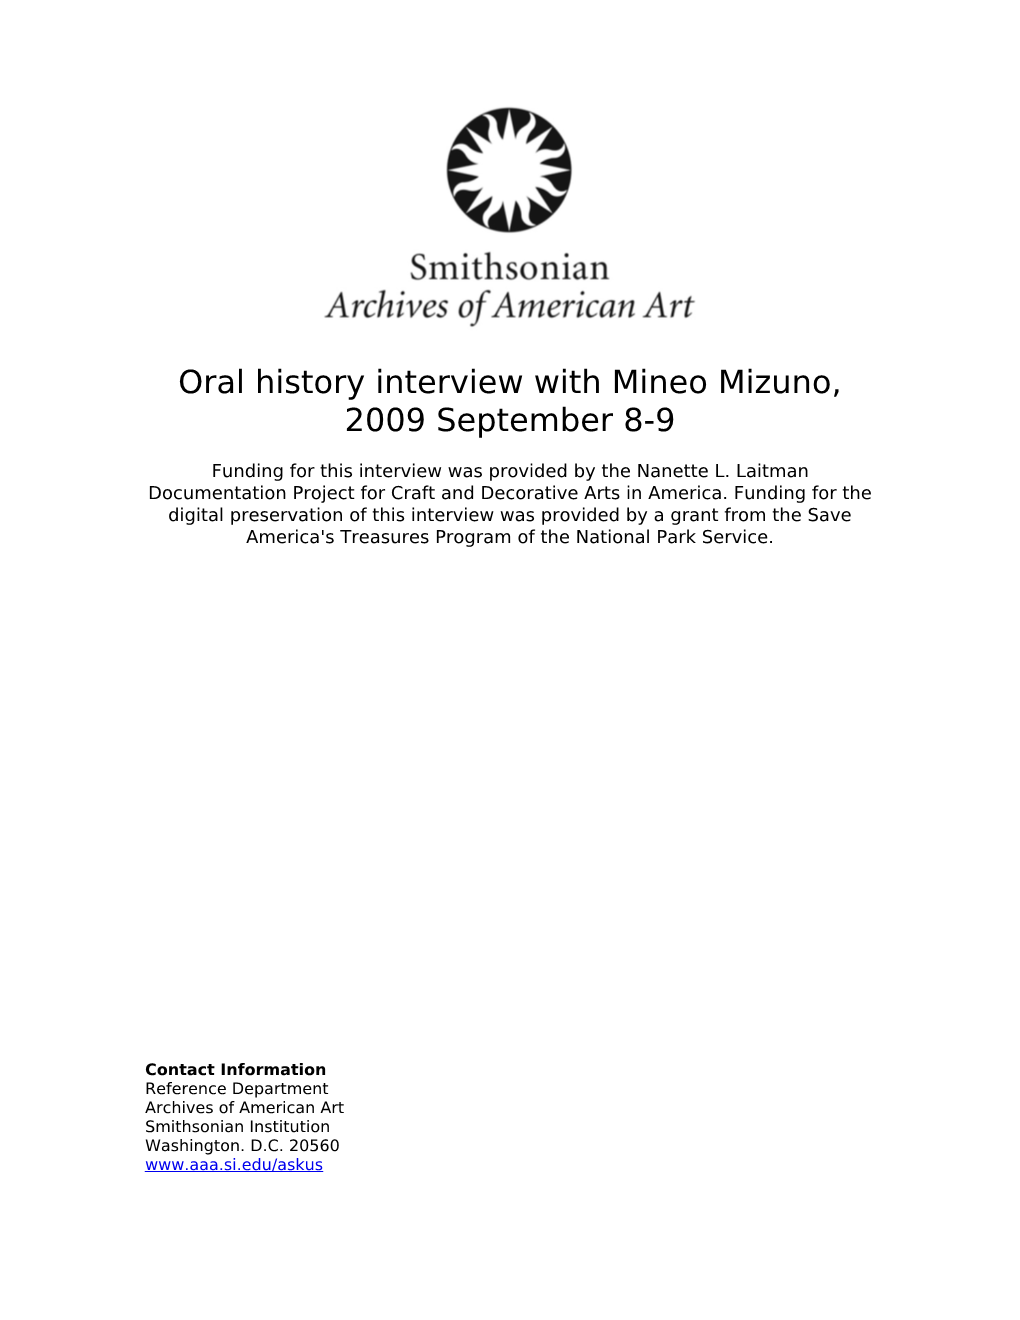 Oral History Interview with Mineo Mizuno, 2009 September 8-9